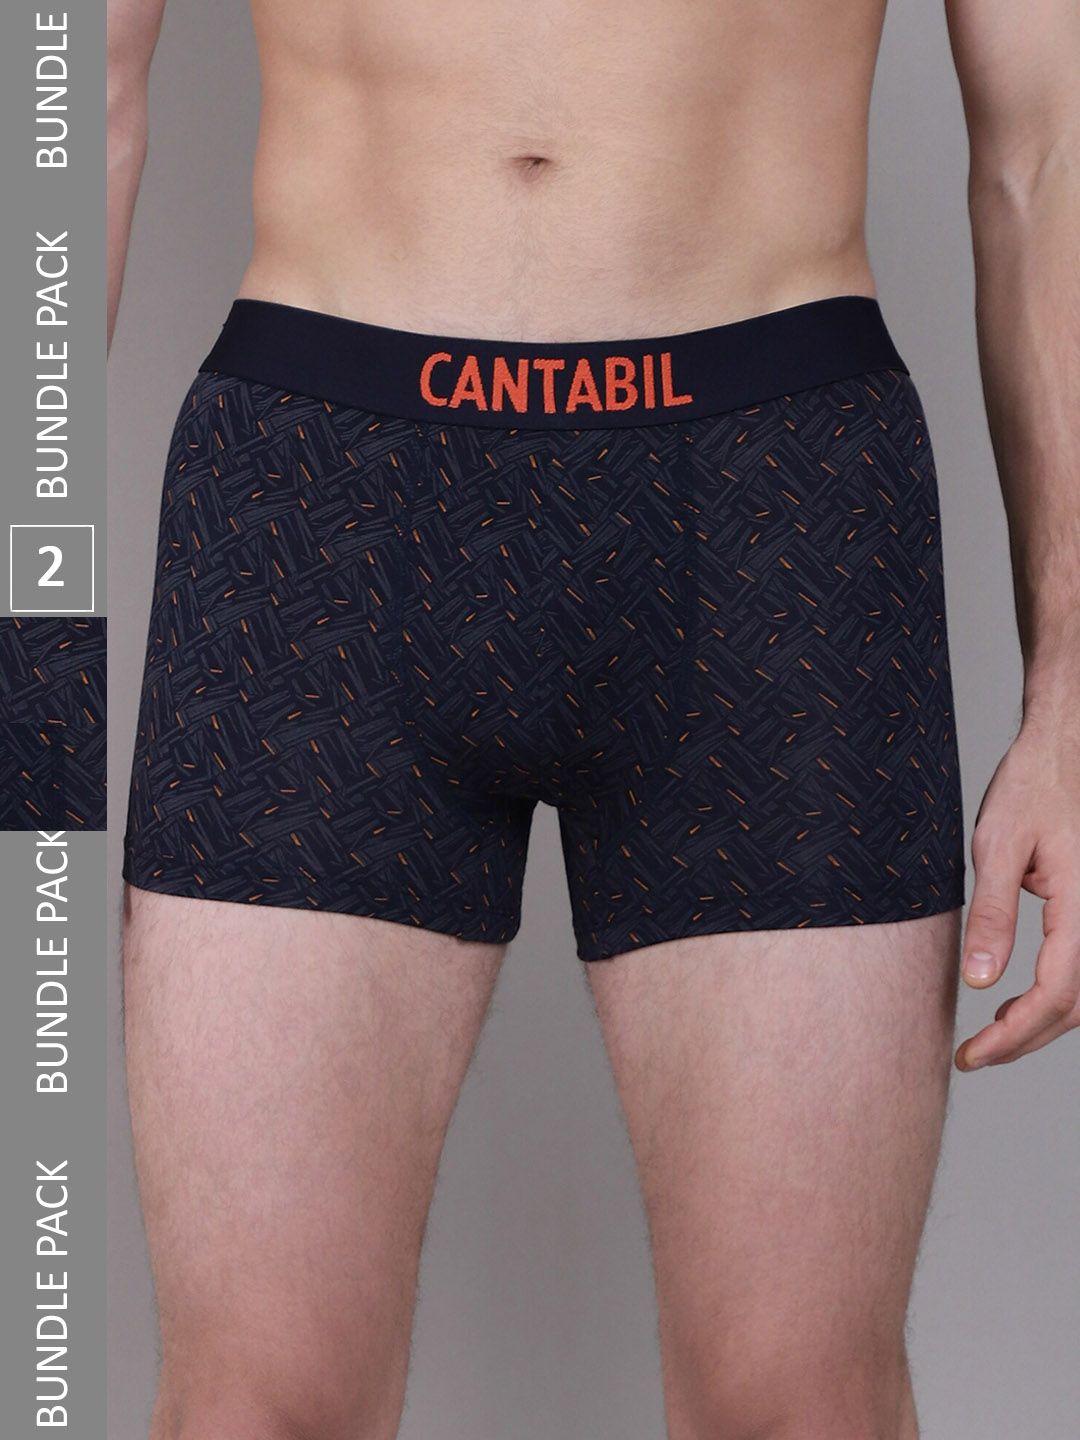 cantabil-pack-of-2-printed-basic-briefs-mbrf00029_navy_p2